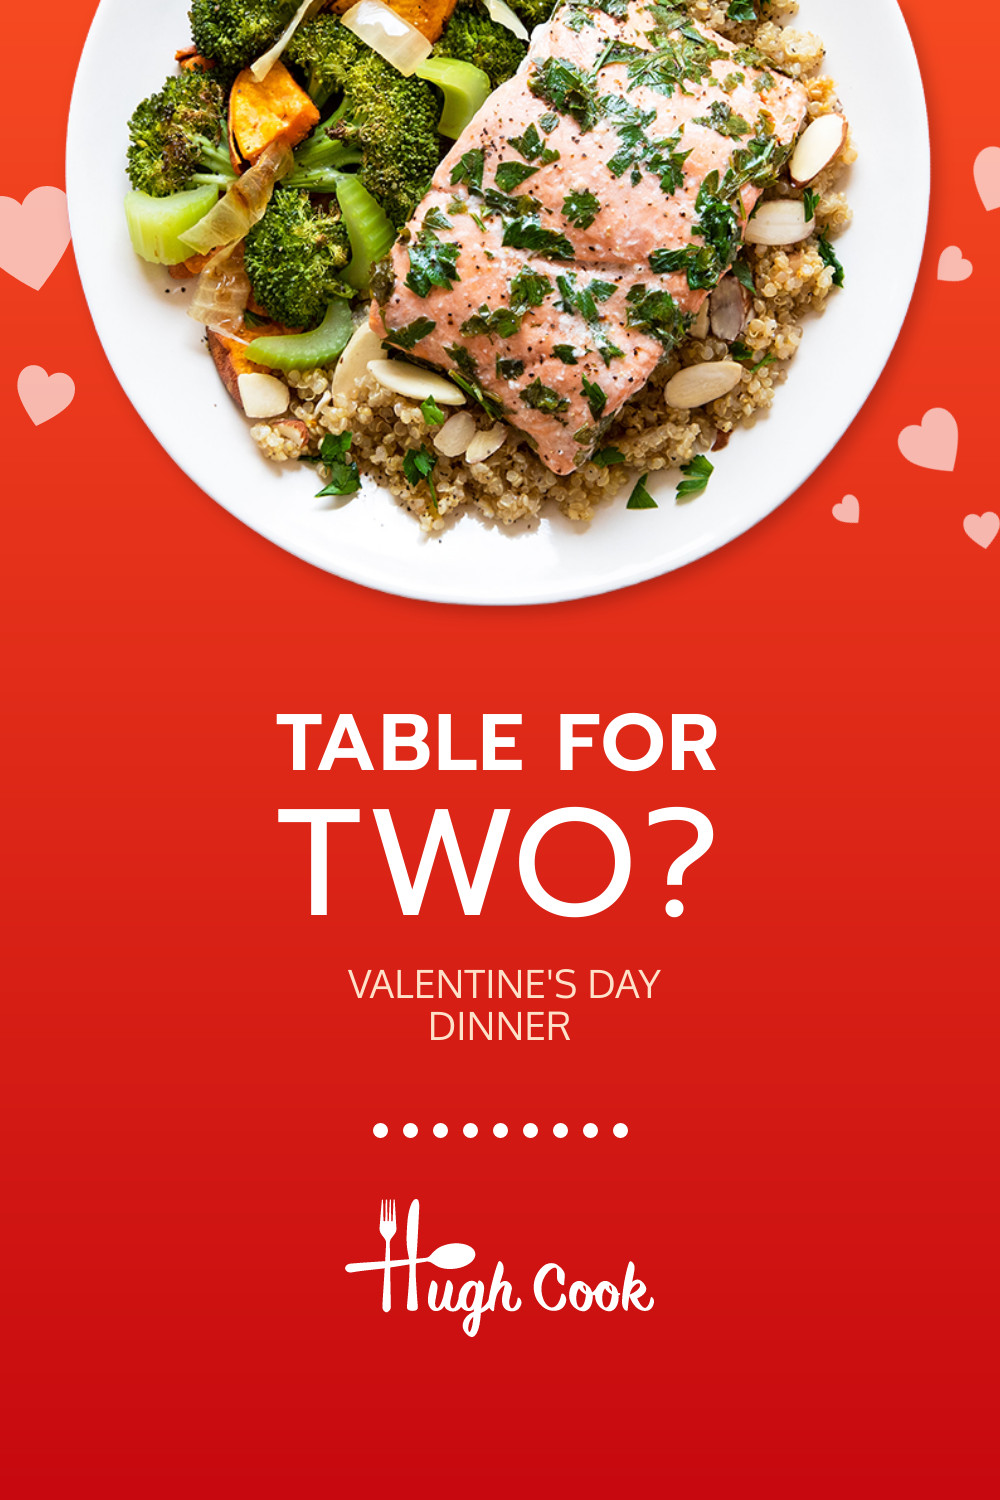 Table For Two on Valentine's Day